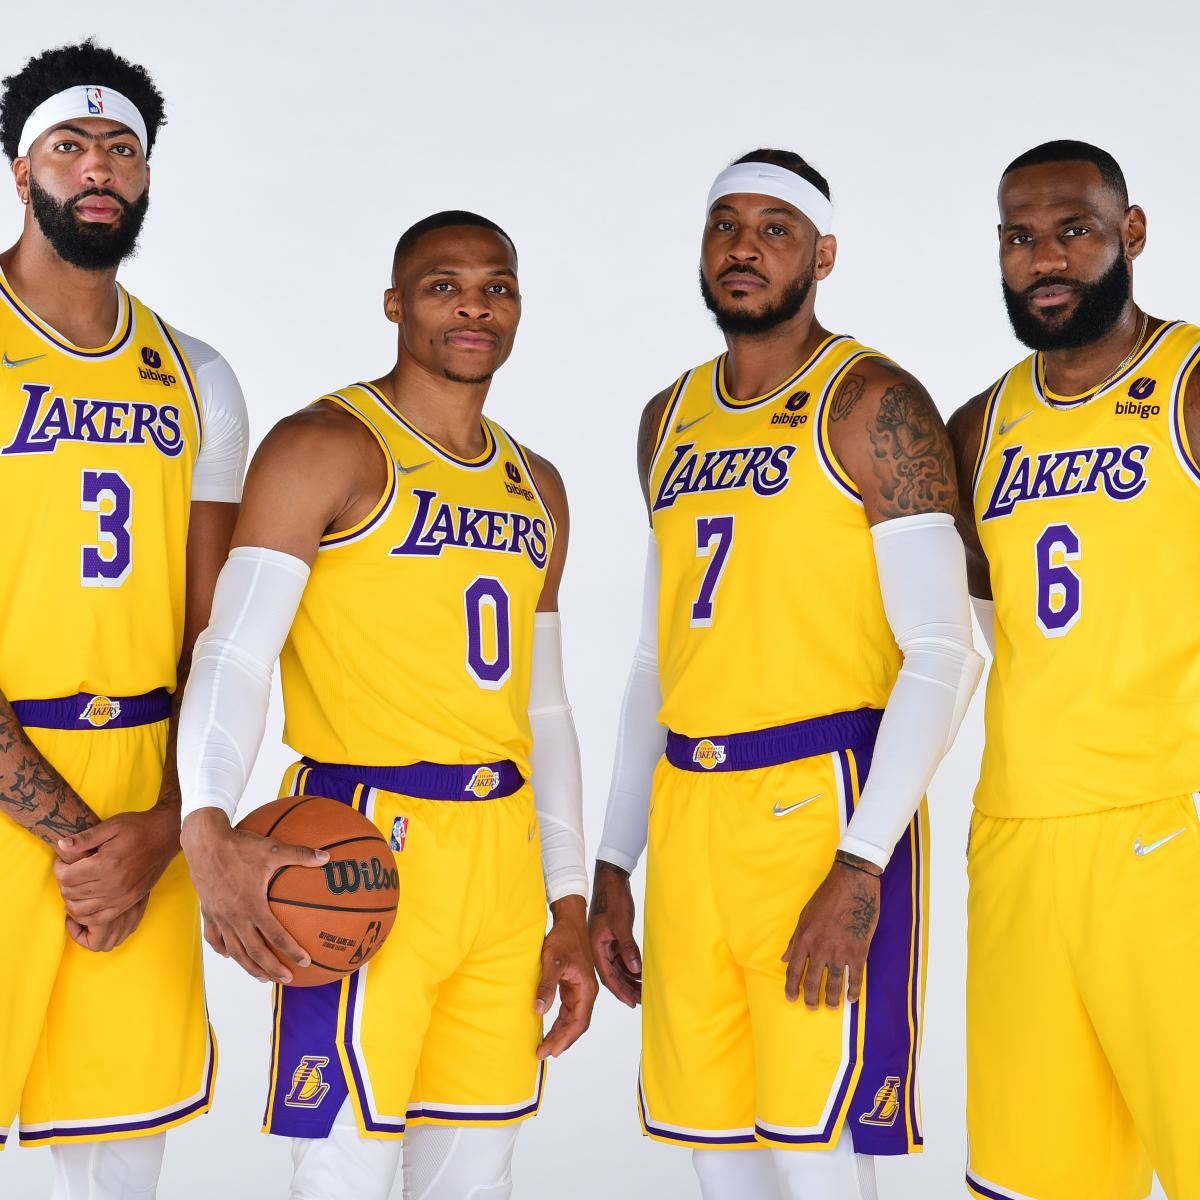 Lakers News: LeBron James, Russell Westbrook, Carmelo Anthony Out vs. Nets thumbnail